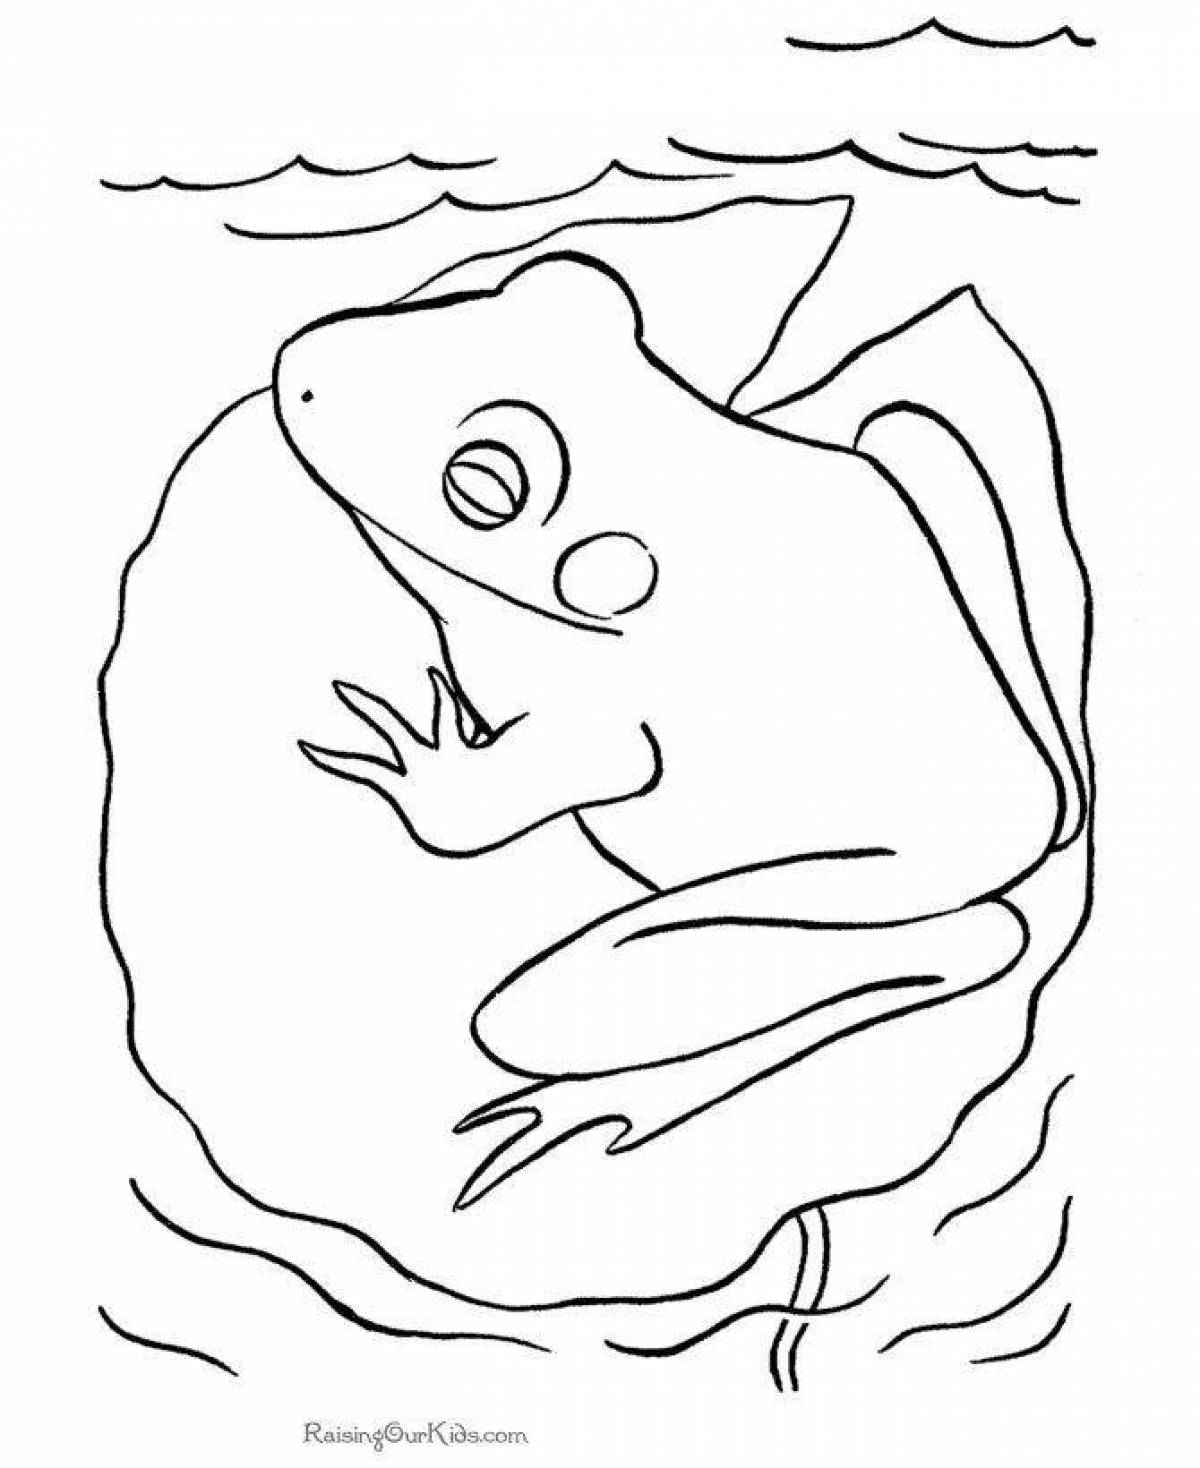 Coloring page nice toad and rose